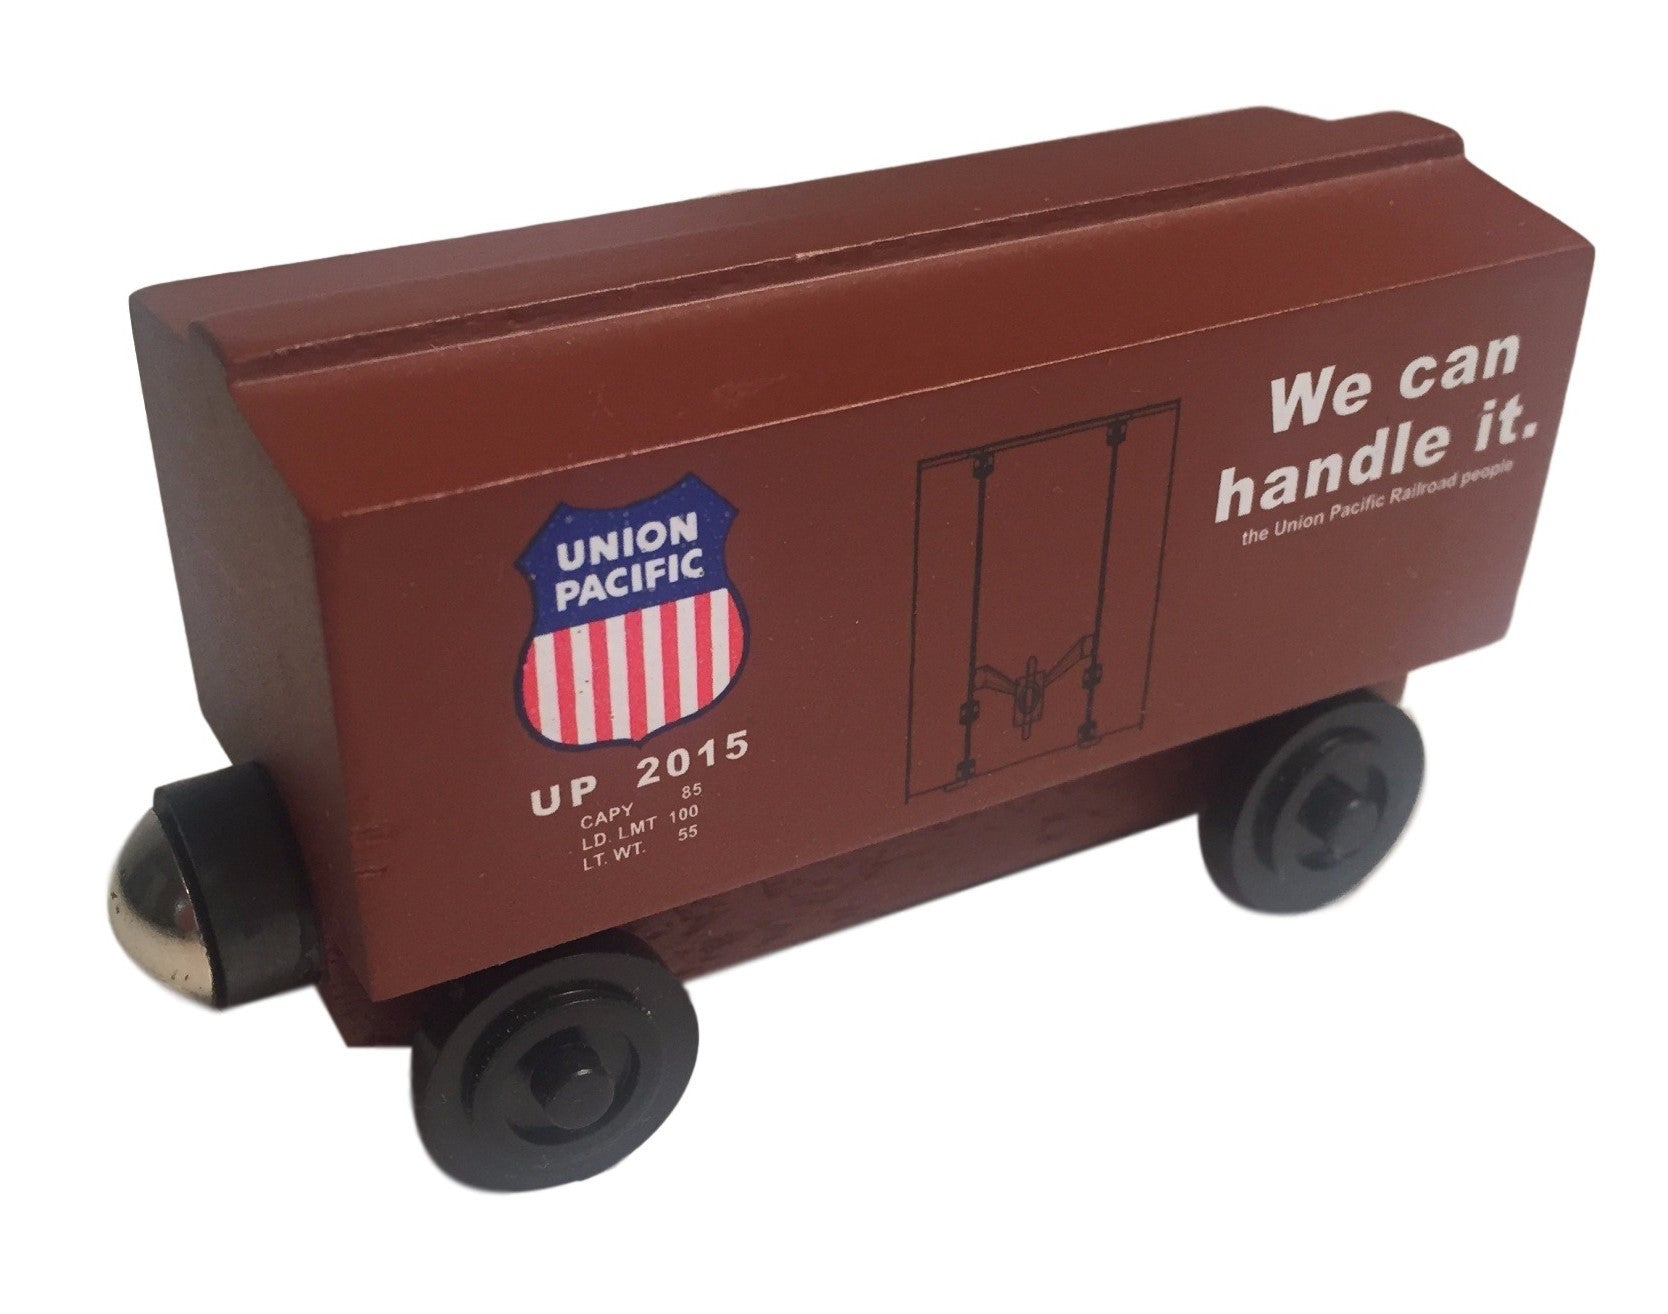 Whittle Shortline Railroad Union Pacific Boxcar Wooden Toy Train